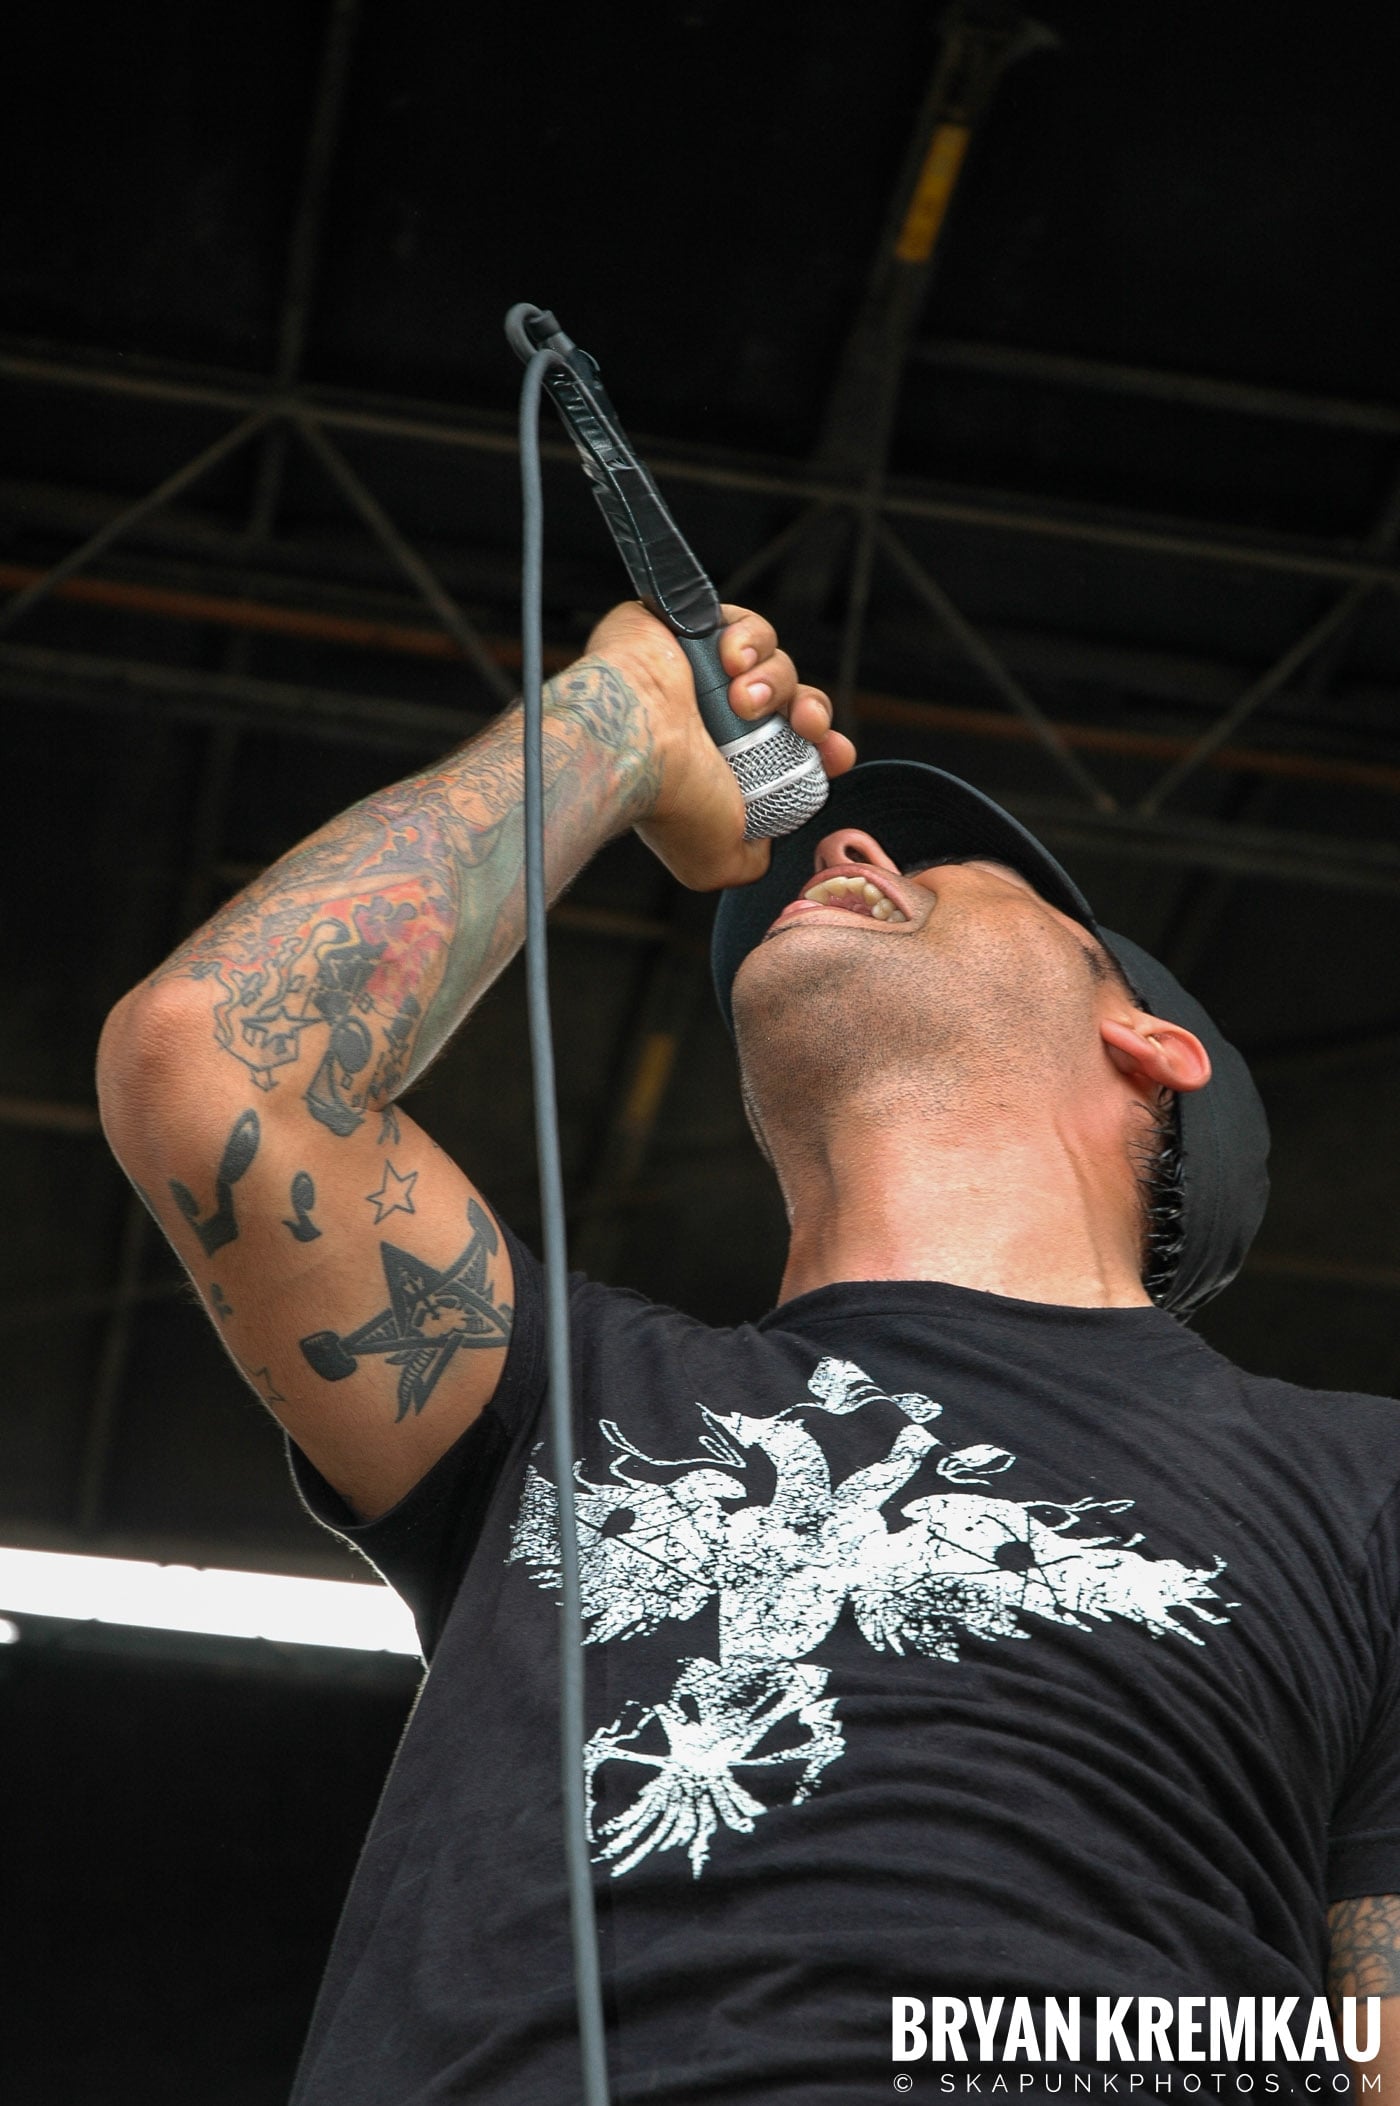 Strung Out @ Warped Tour 05, NYC - 8.12.05 (9)